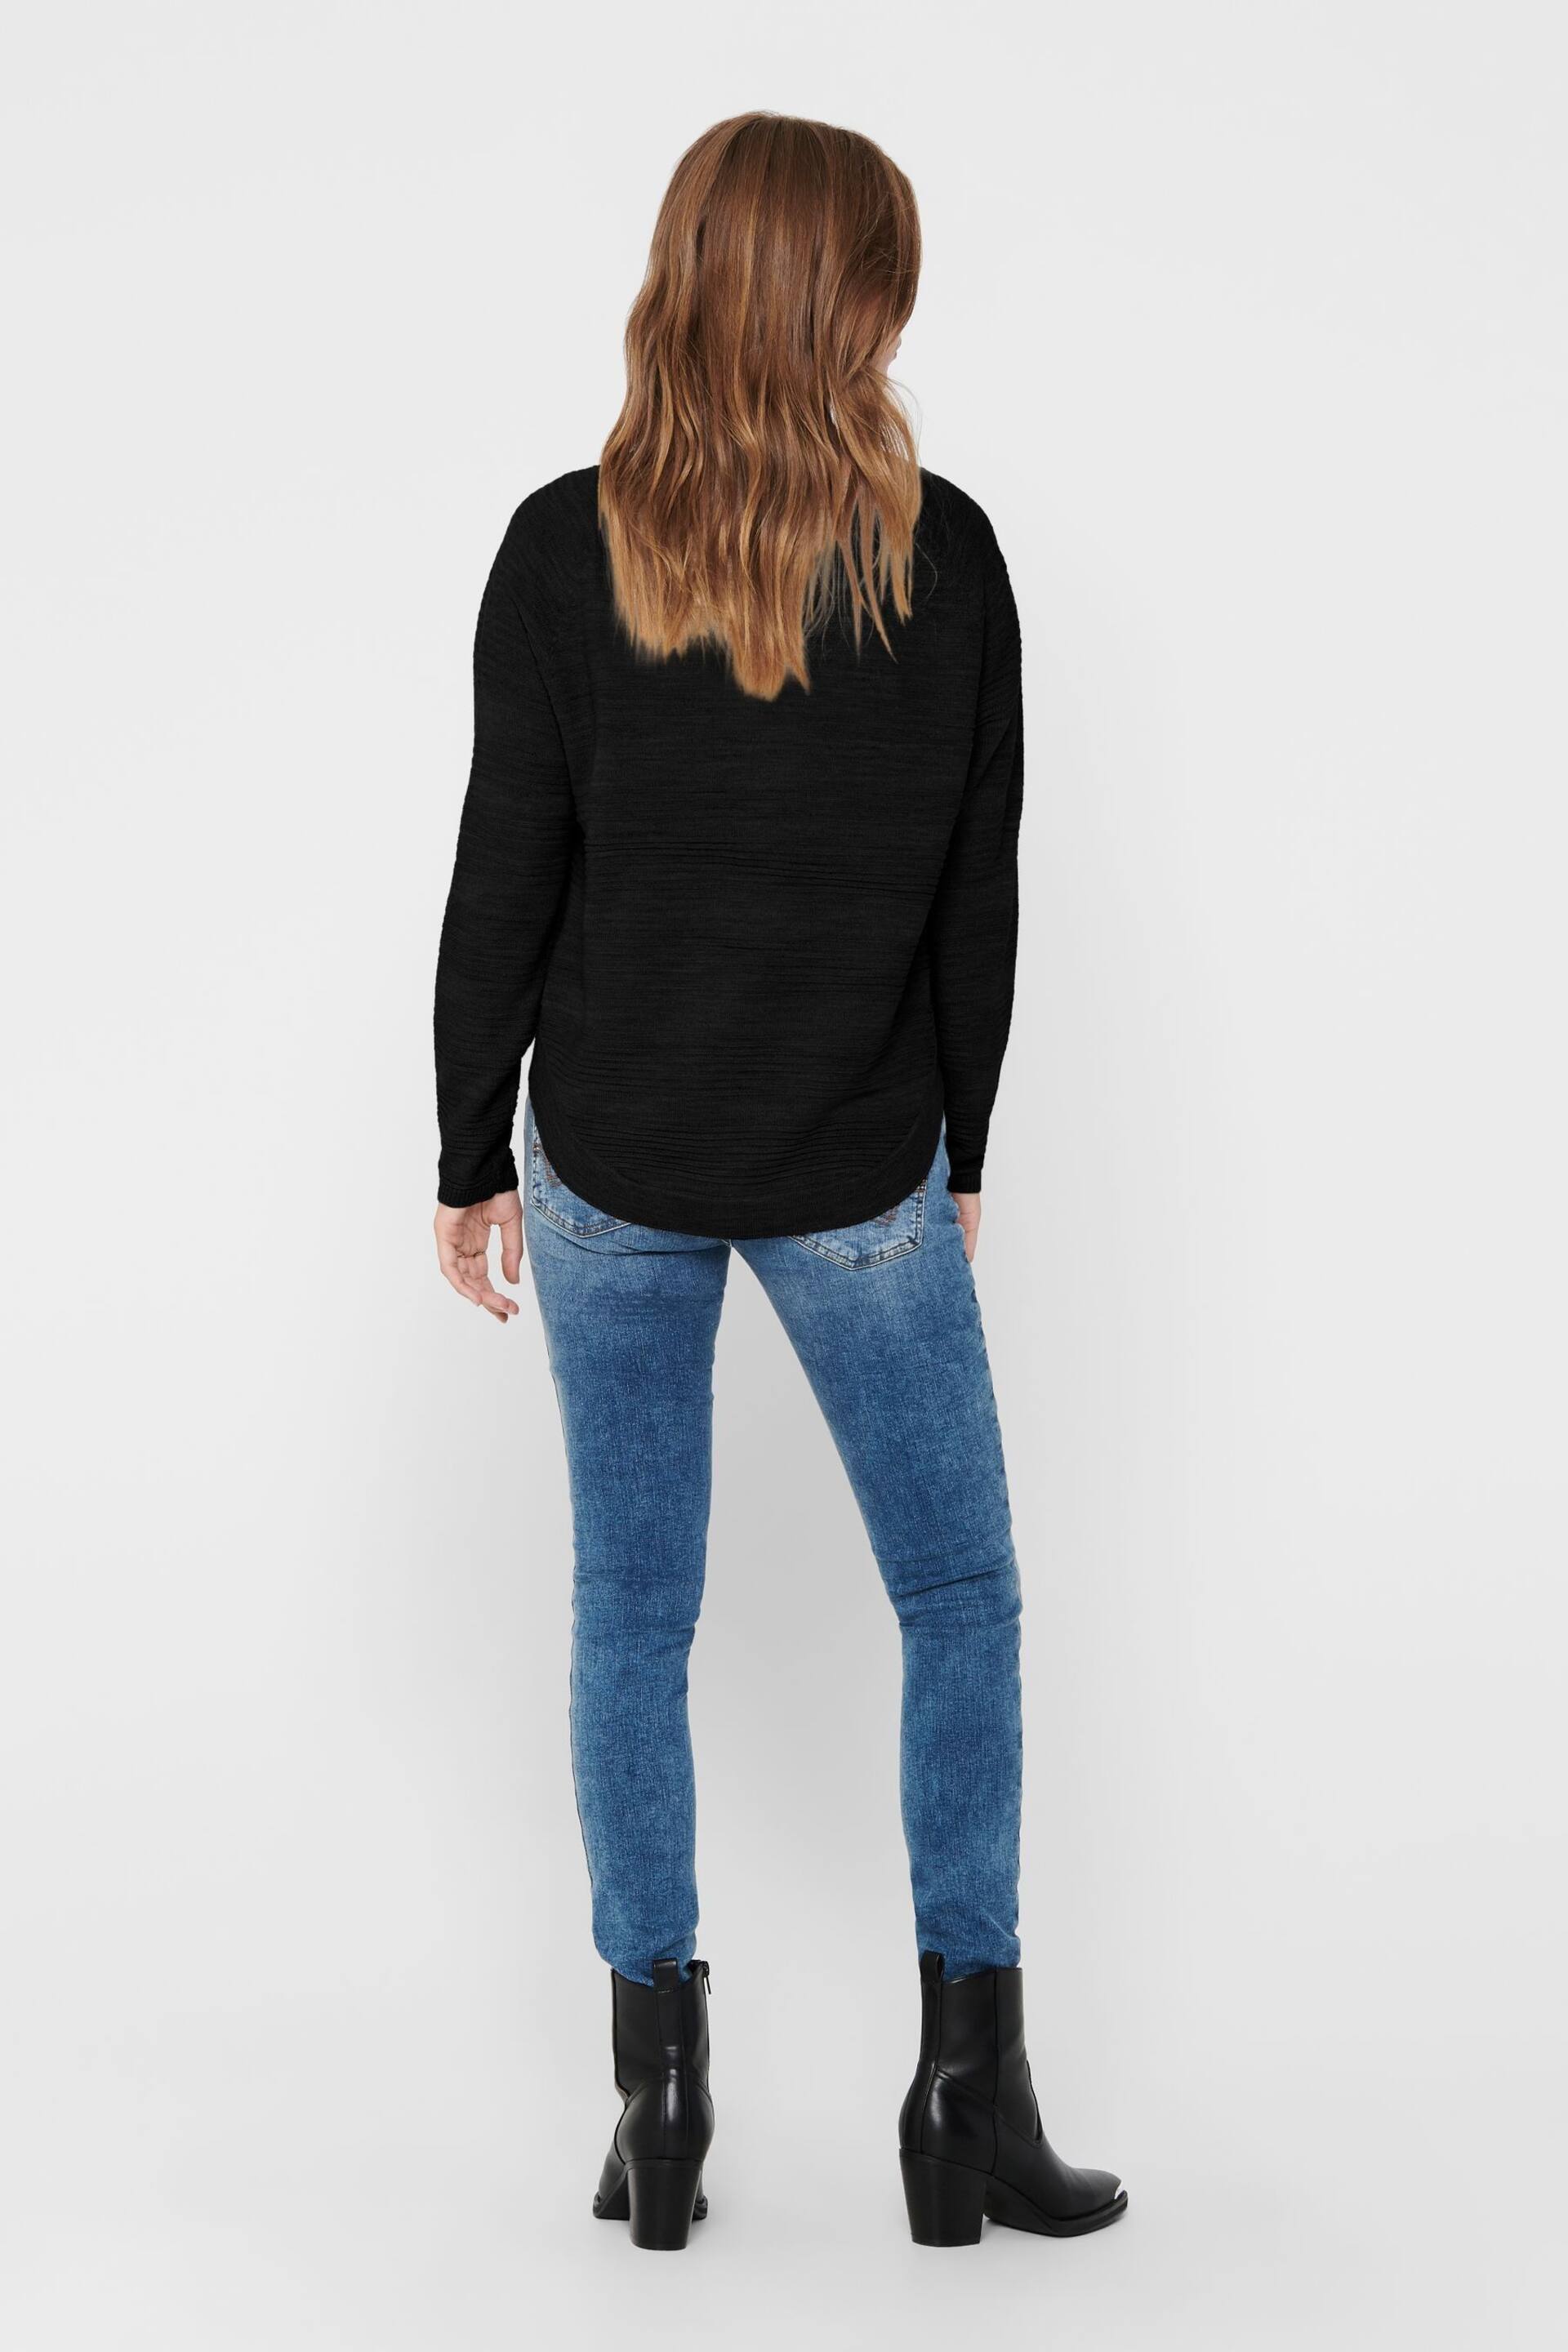 ONLY Black Textured Knitted Jumper - Image 3 of 5